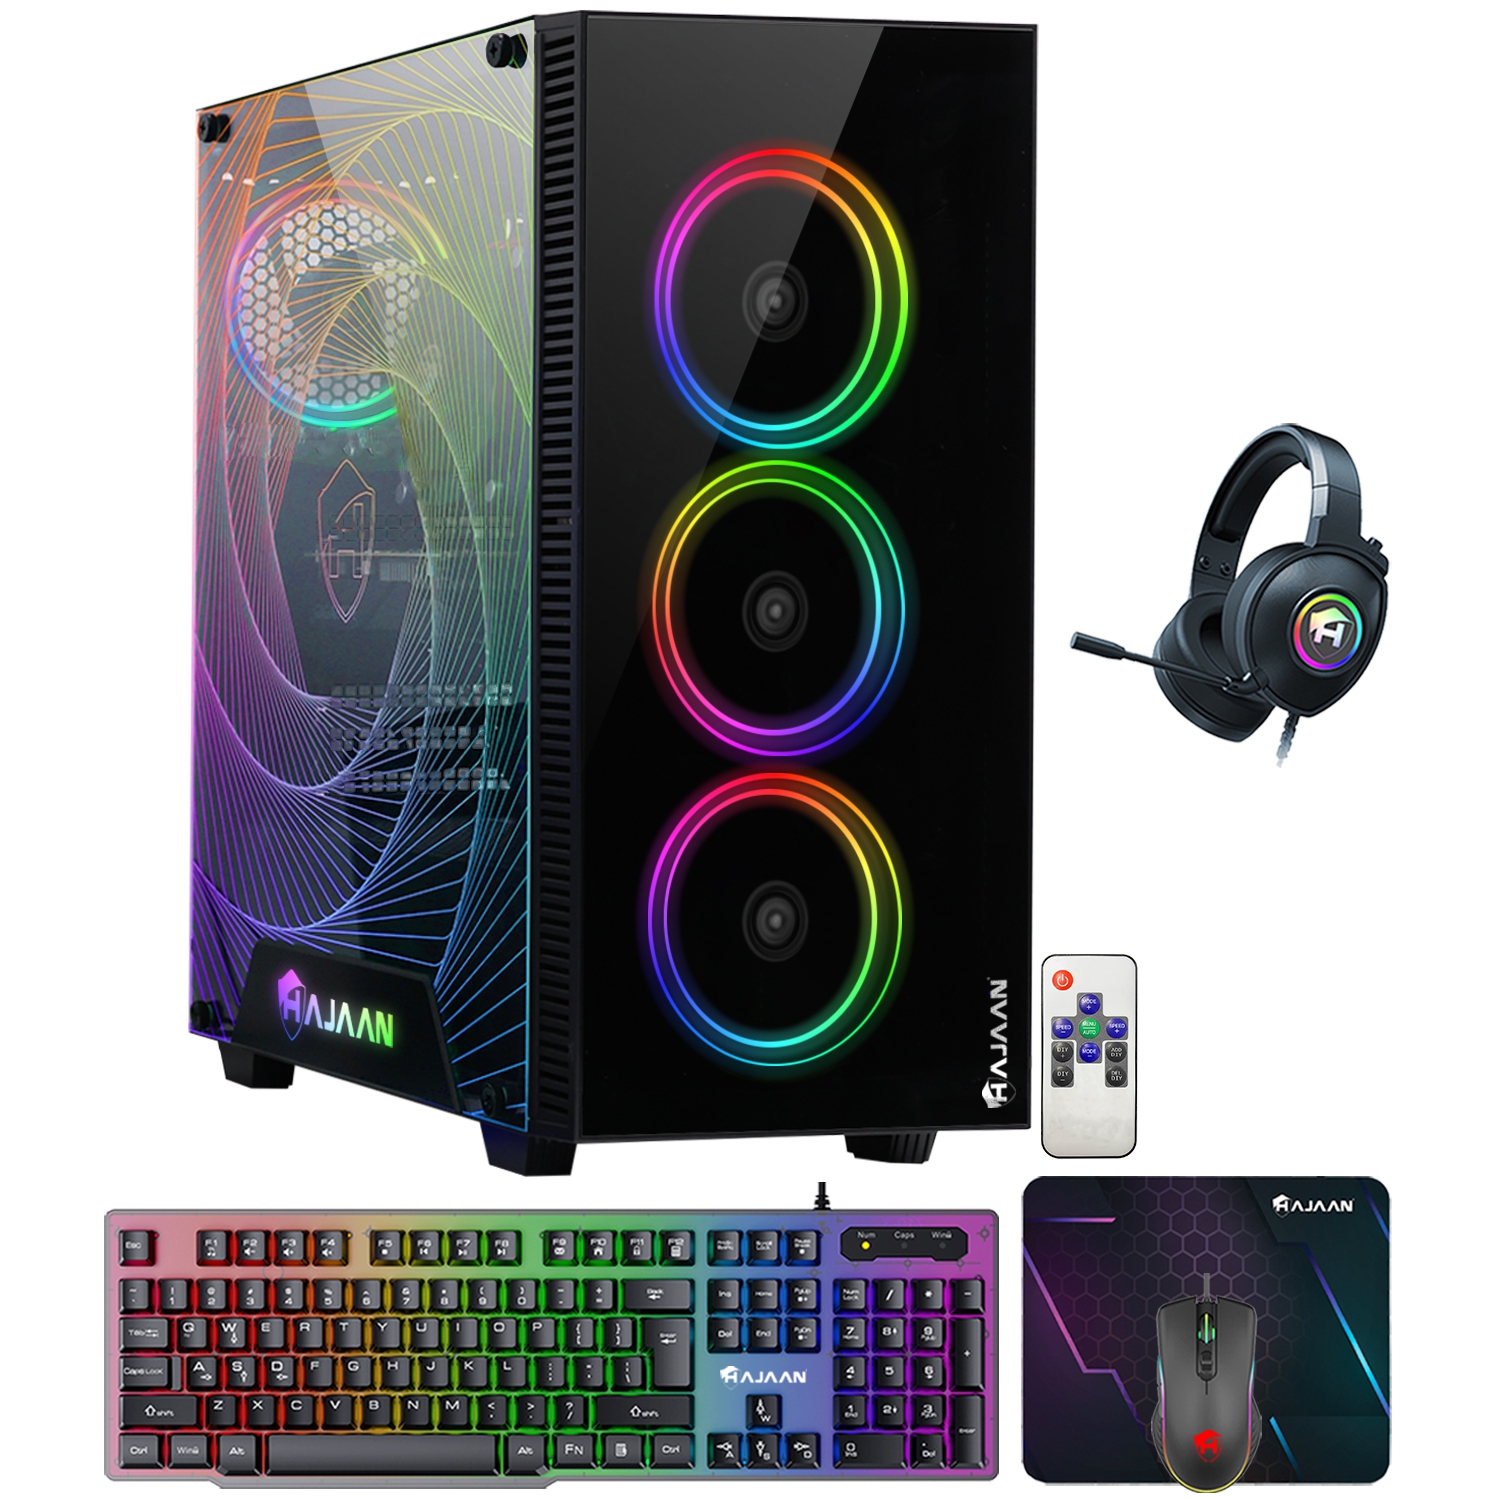 HAJAAN CYCLONIA Gaming Tower Computer Desktop PC - AMD Ryzen 7 5700G Processor Up to 4.6GHz - RTX 3070 8GB GDDR6 - 32GB DDR4 - 1TB SSD - Windows 11 Pro - Keyboard Mouse and Headset